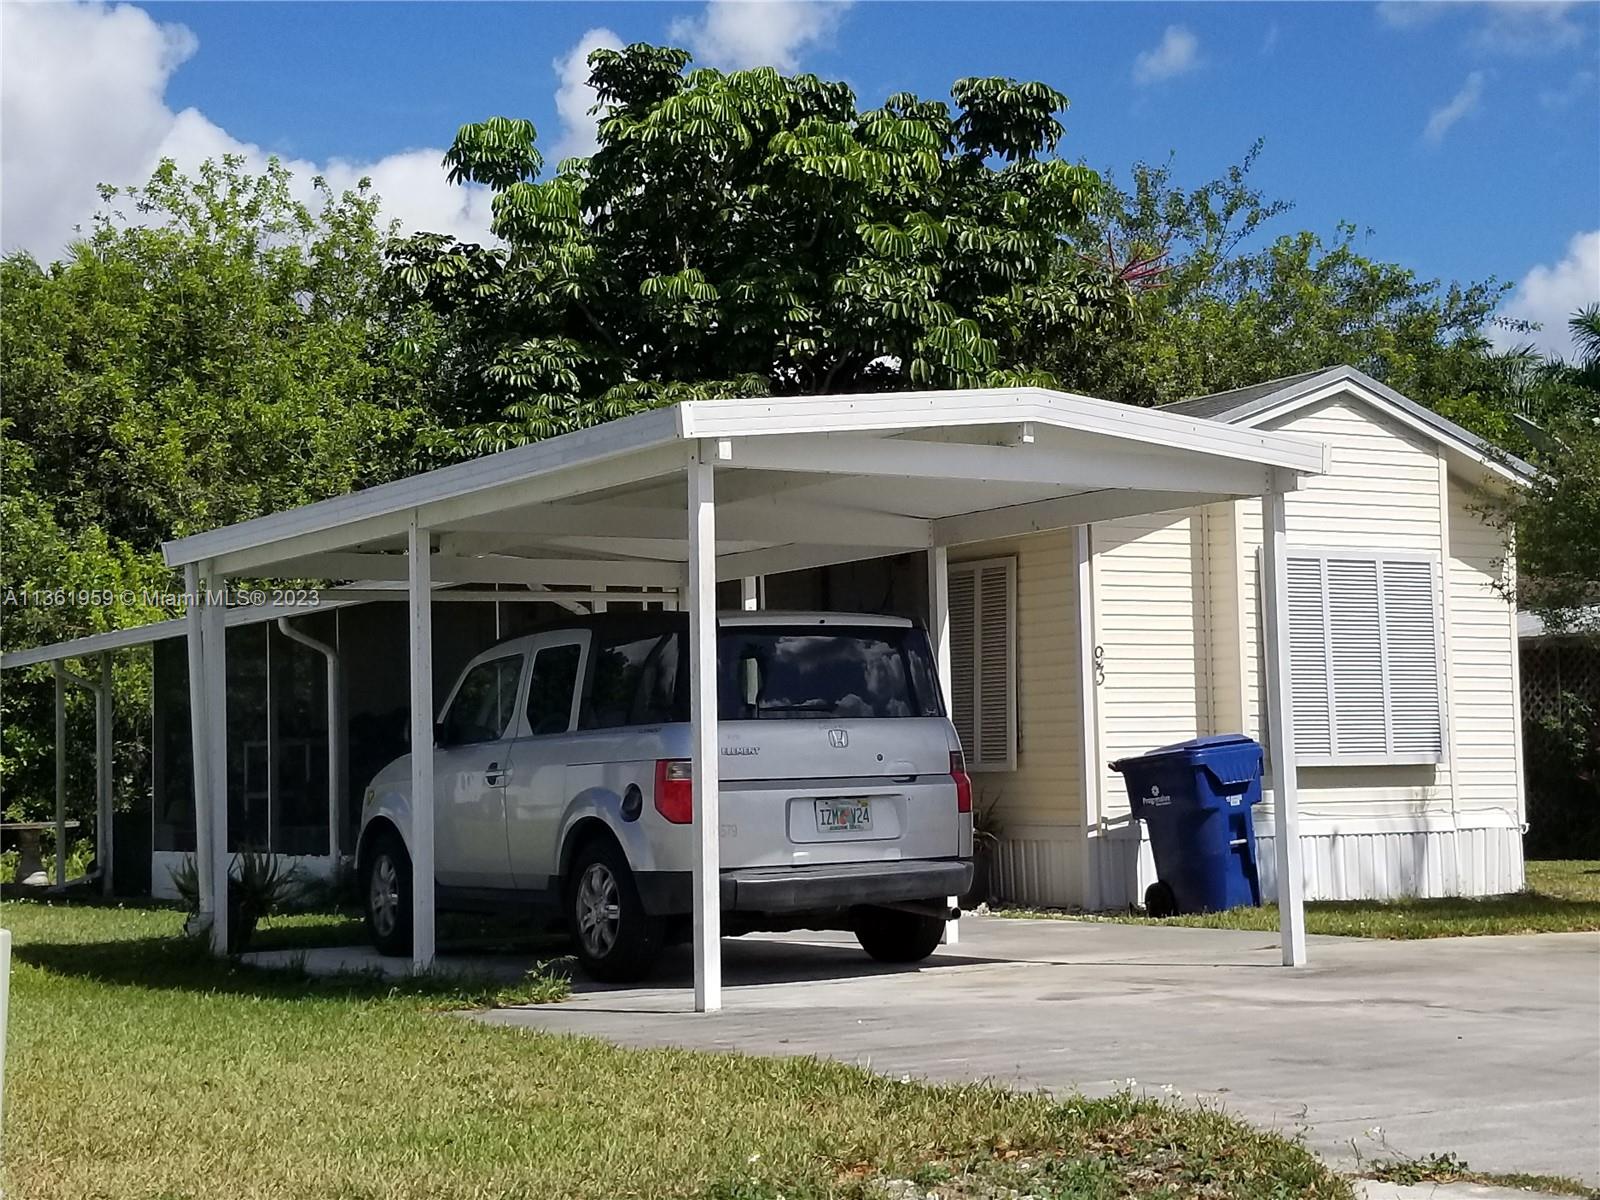 Beautiful 1 Bedroom one bathroom manufactured home with land. With screened in patio, carport and shed. In a gated community, with a community pool area. Property is well kept. Within 20 to 25 minutes from the Florida Keys and close to the Turnpike. Close to shopping centers, restaurants and moore. A must see.